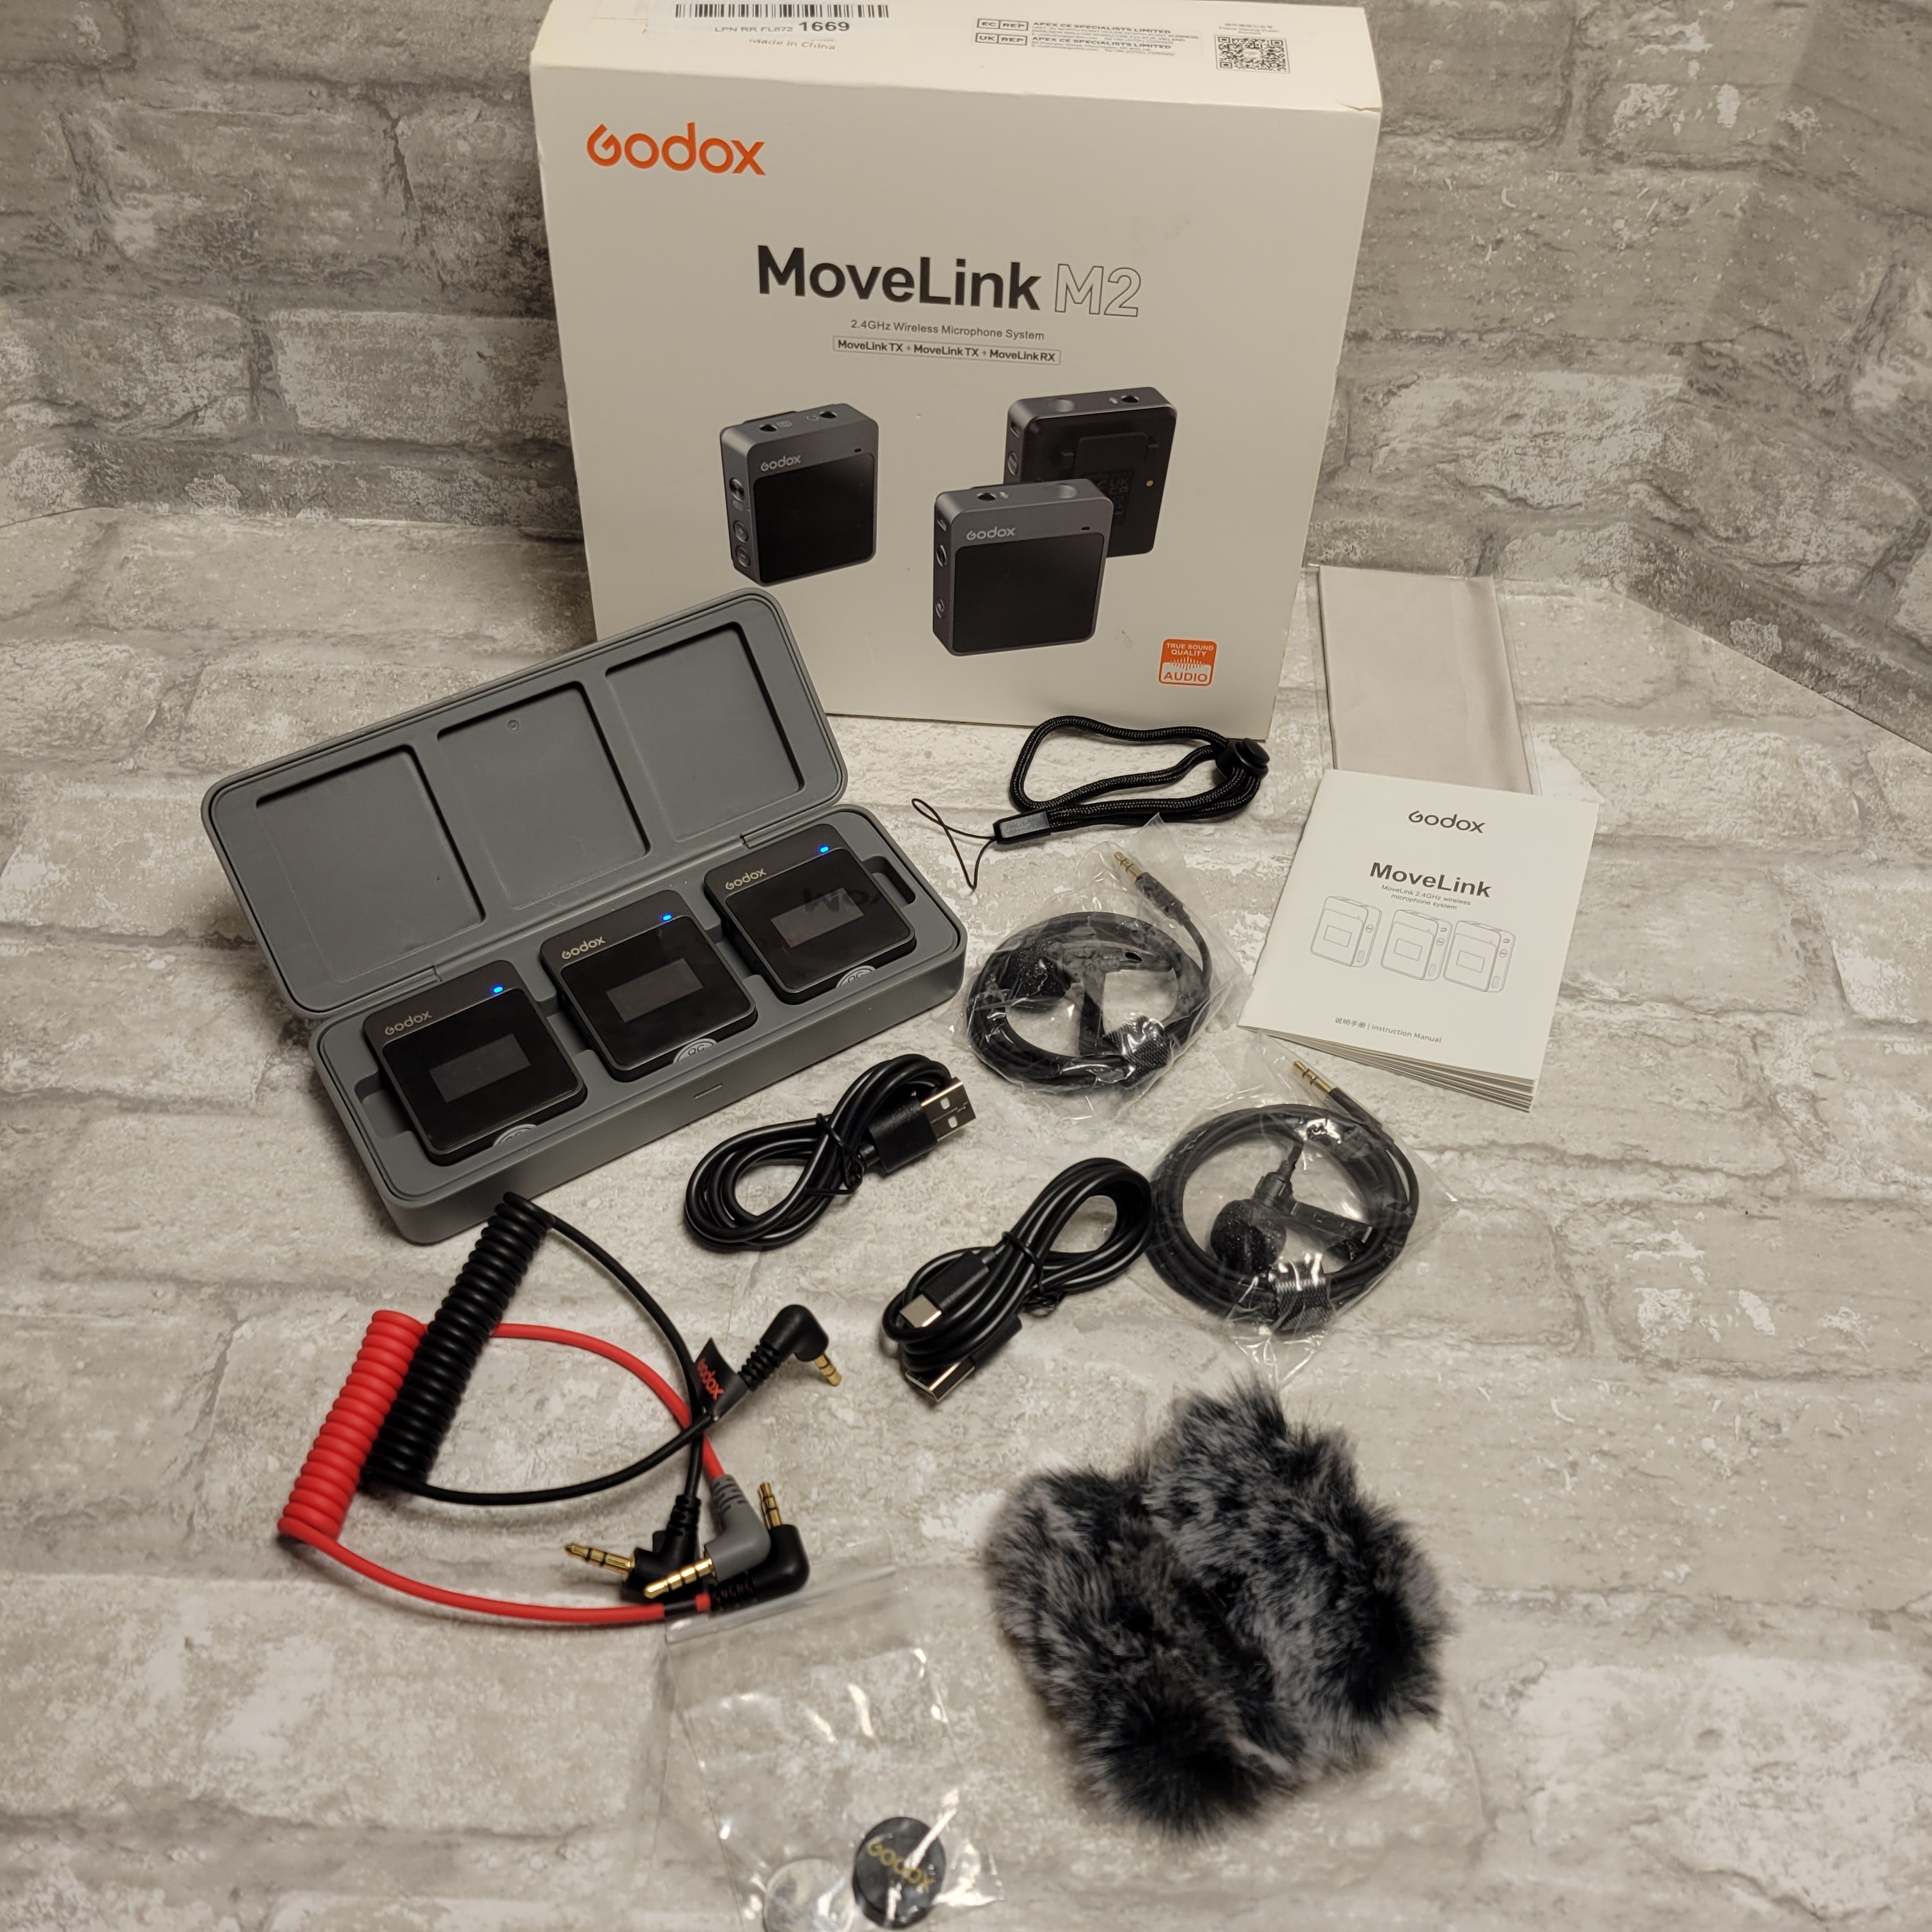 Godox MoveLink M2 2.4GHz Dual Channel Wireless Microphone System for Camera (8038528680174)